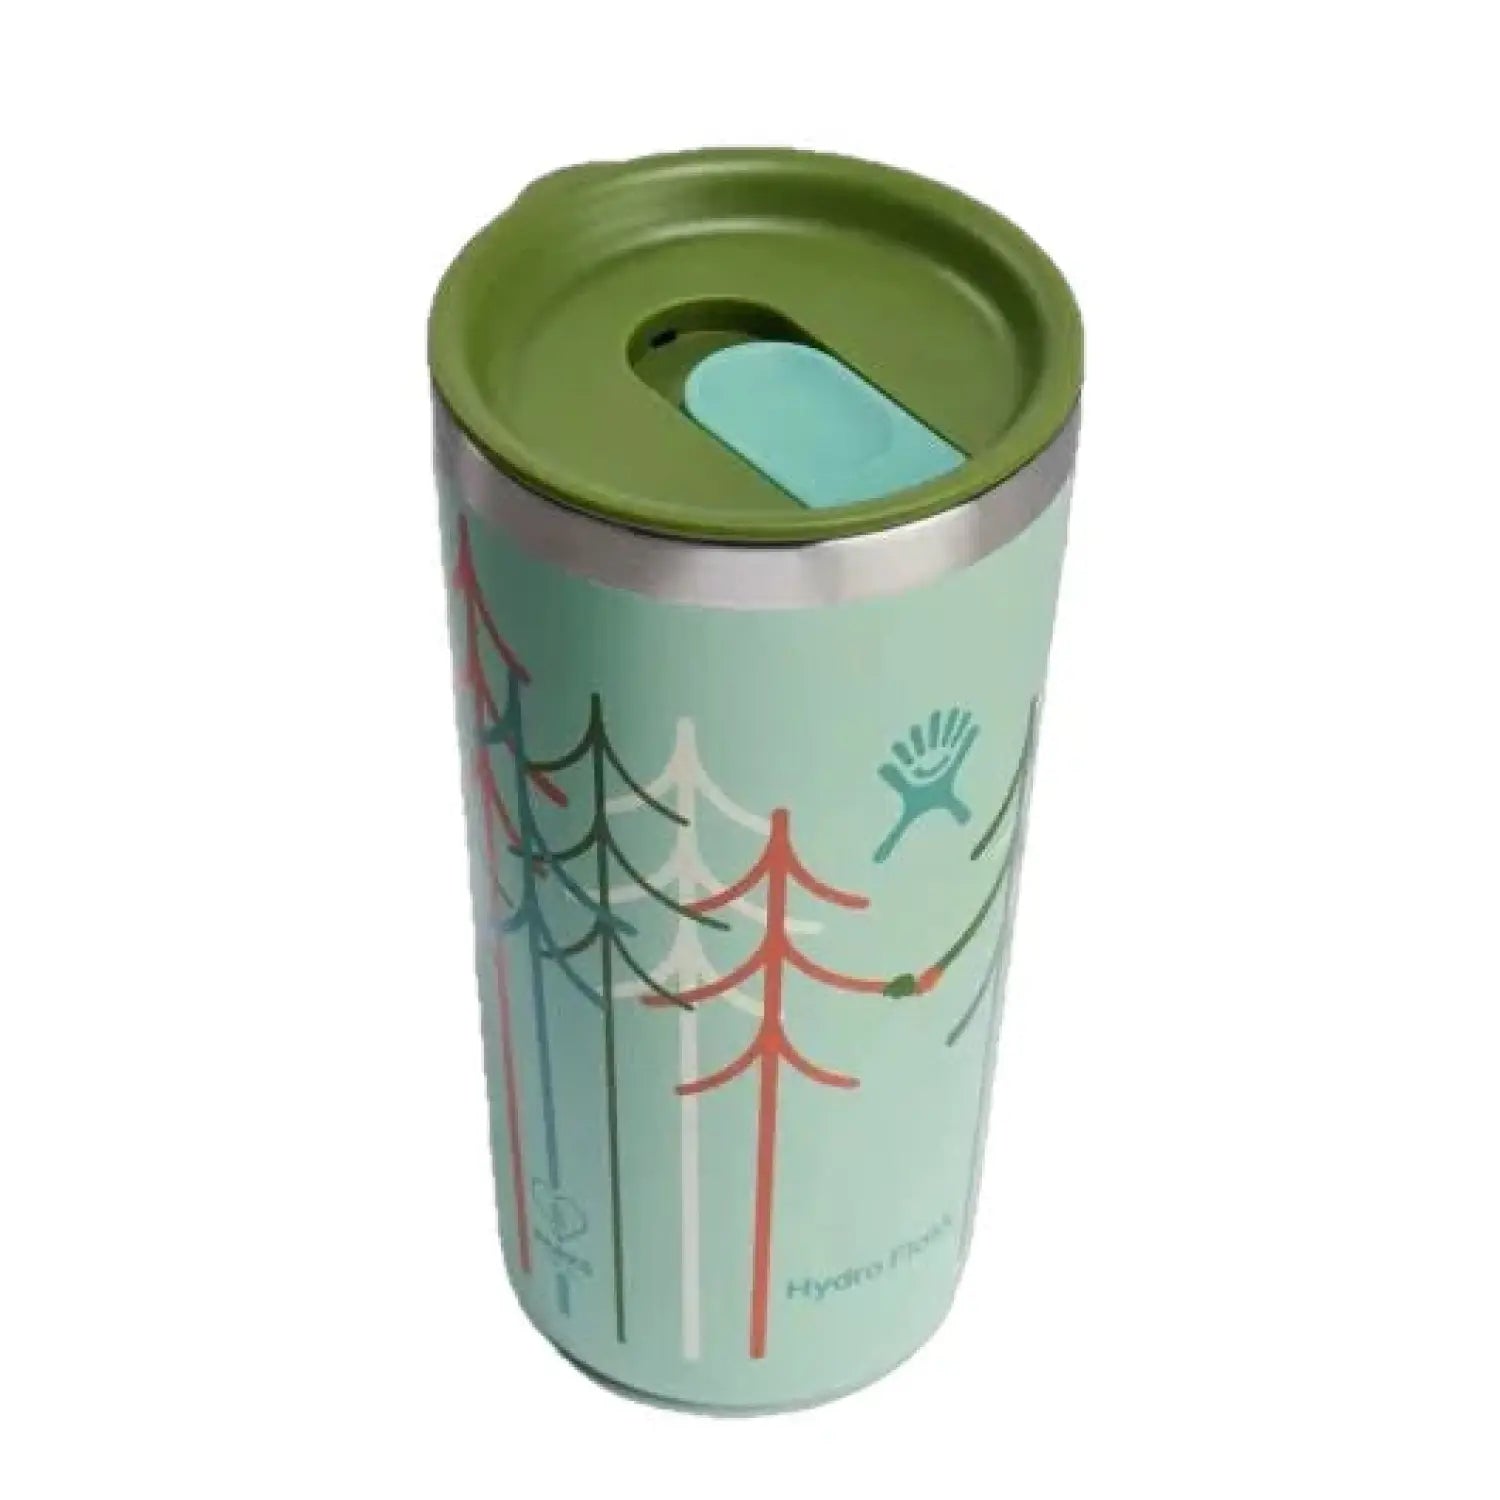 Hydro Flask Let's Go Together 20 oz All Around™ Tumbler. Aqua tumbler with green, whie, red, and blue tree design. Blue Hydro Flask logo. Also shown with green lid.